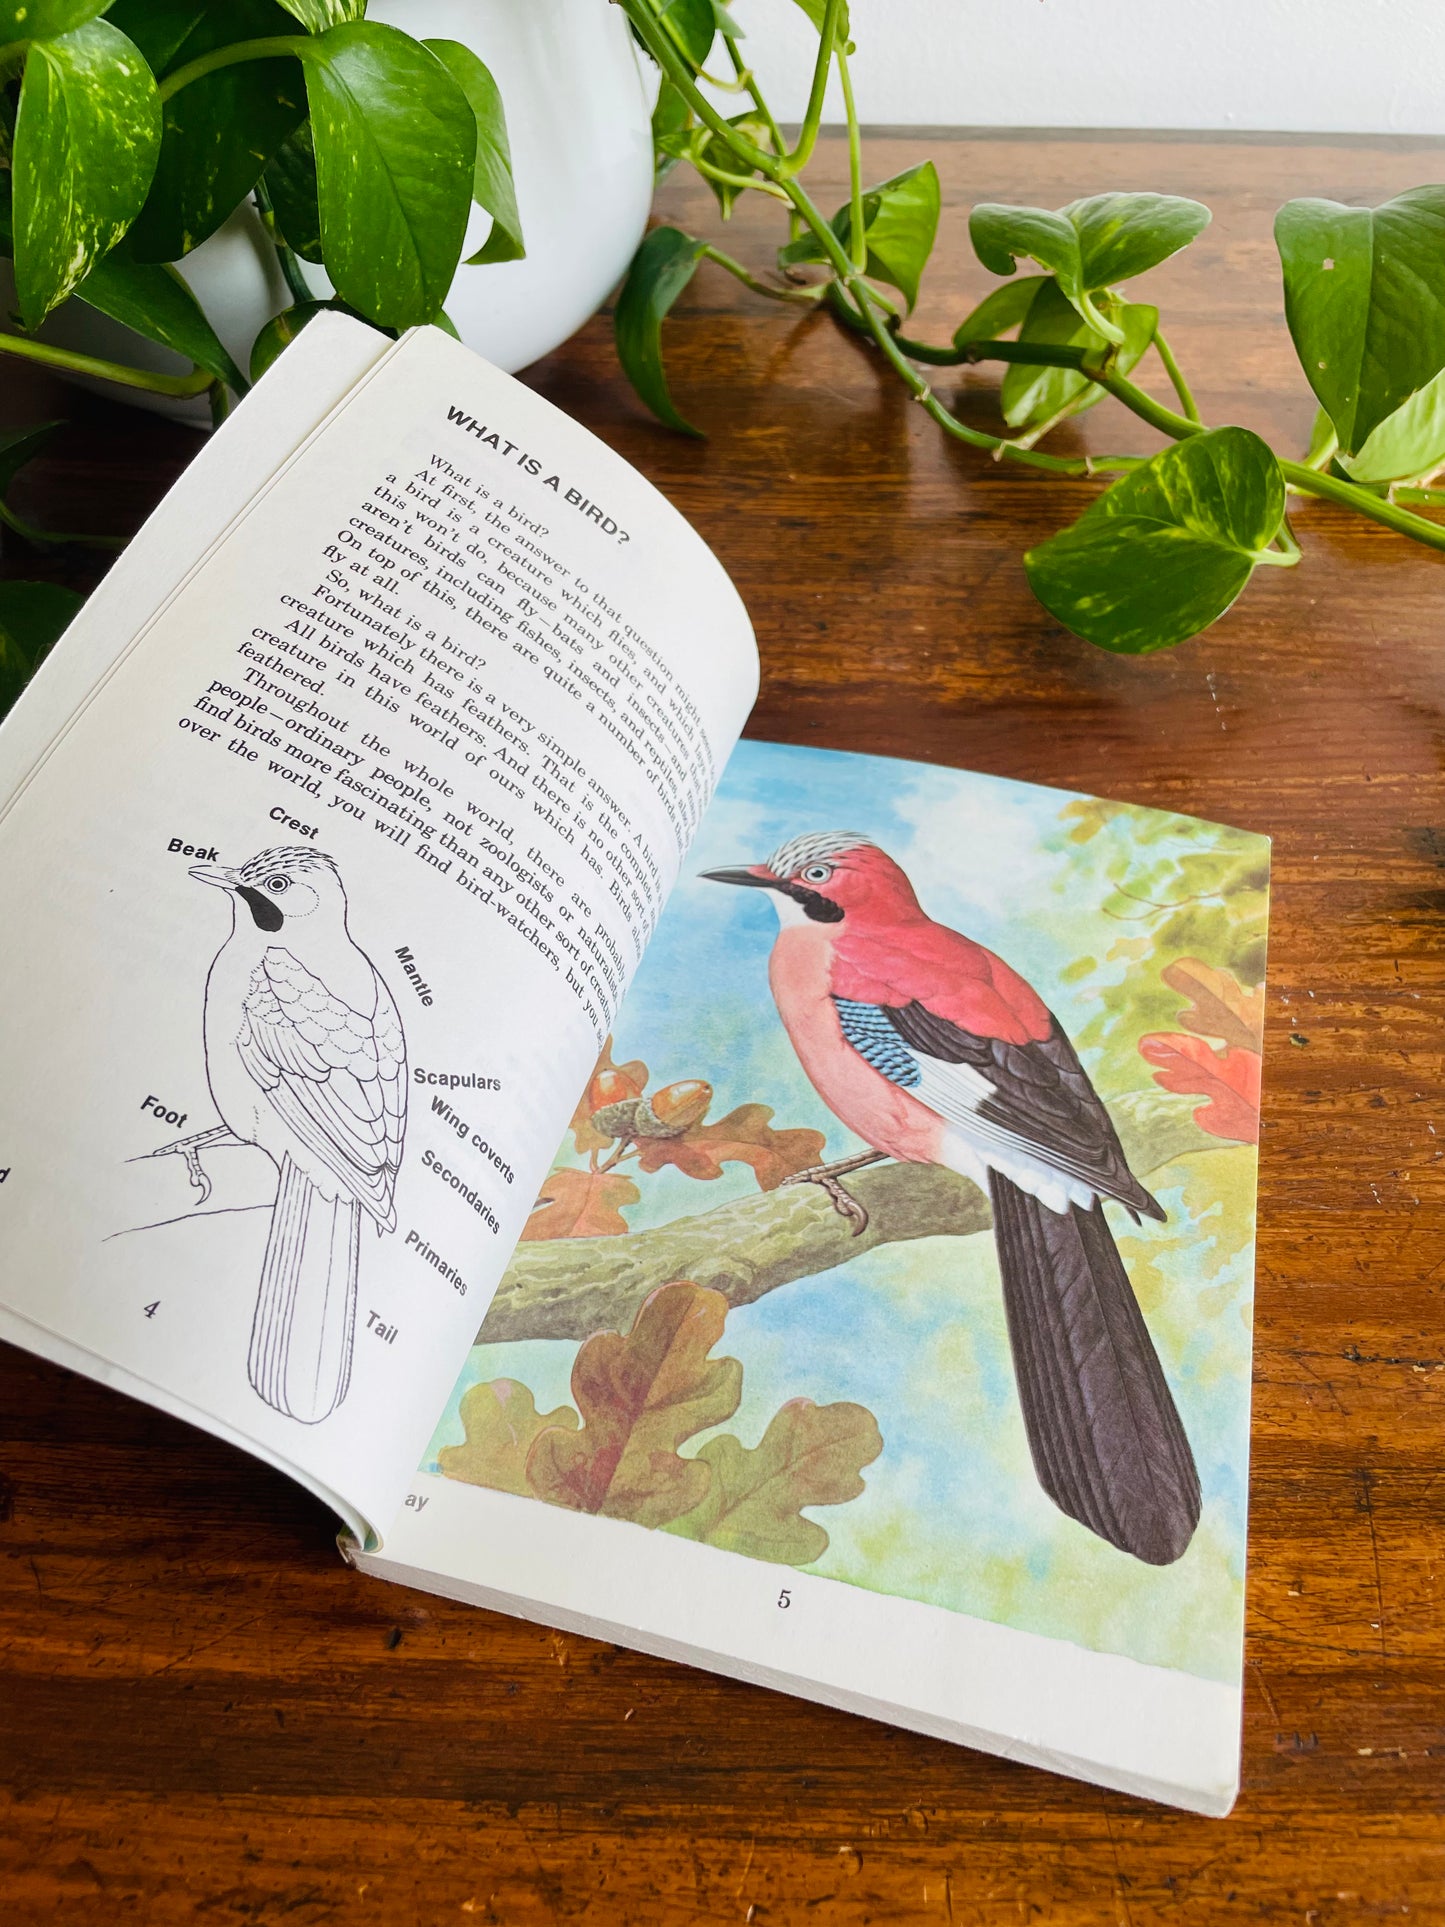 Know About Birds Book by Frederick Edwards (1975)